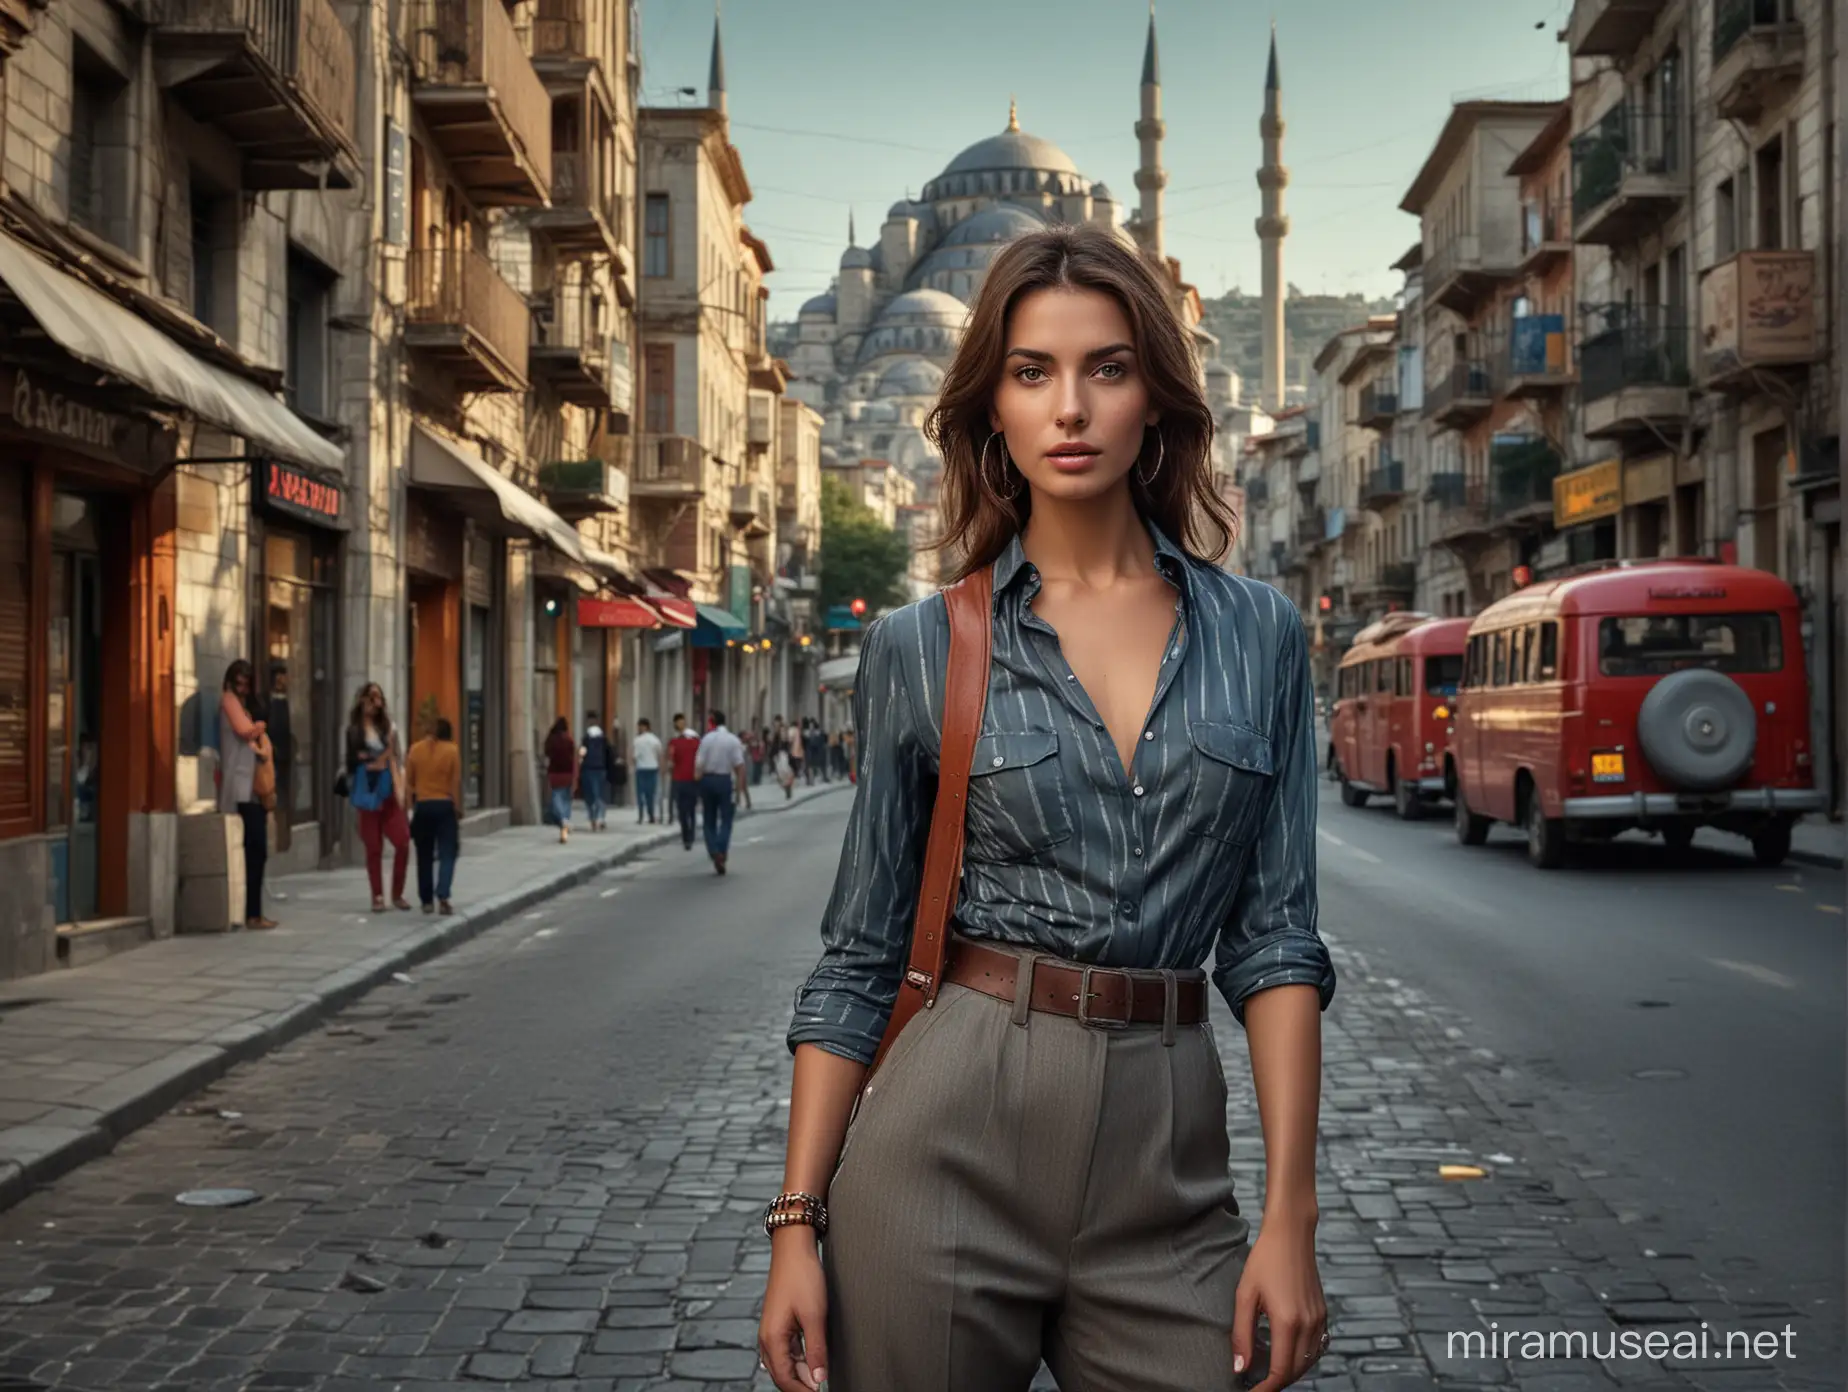 top model modern fashion woman, photorealistic, Hasselblad color, Steve McCurry style lighting, Istanbul best streets in the background, 2.8 aperture, 24-70 lens,